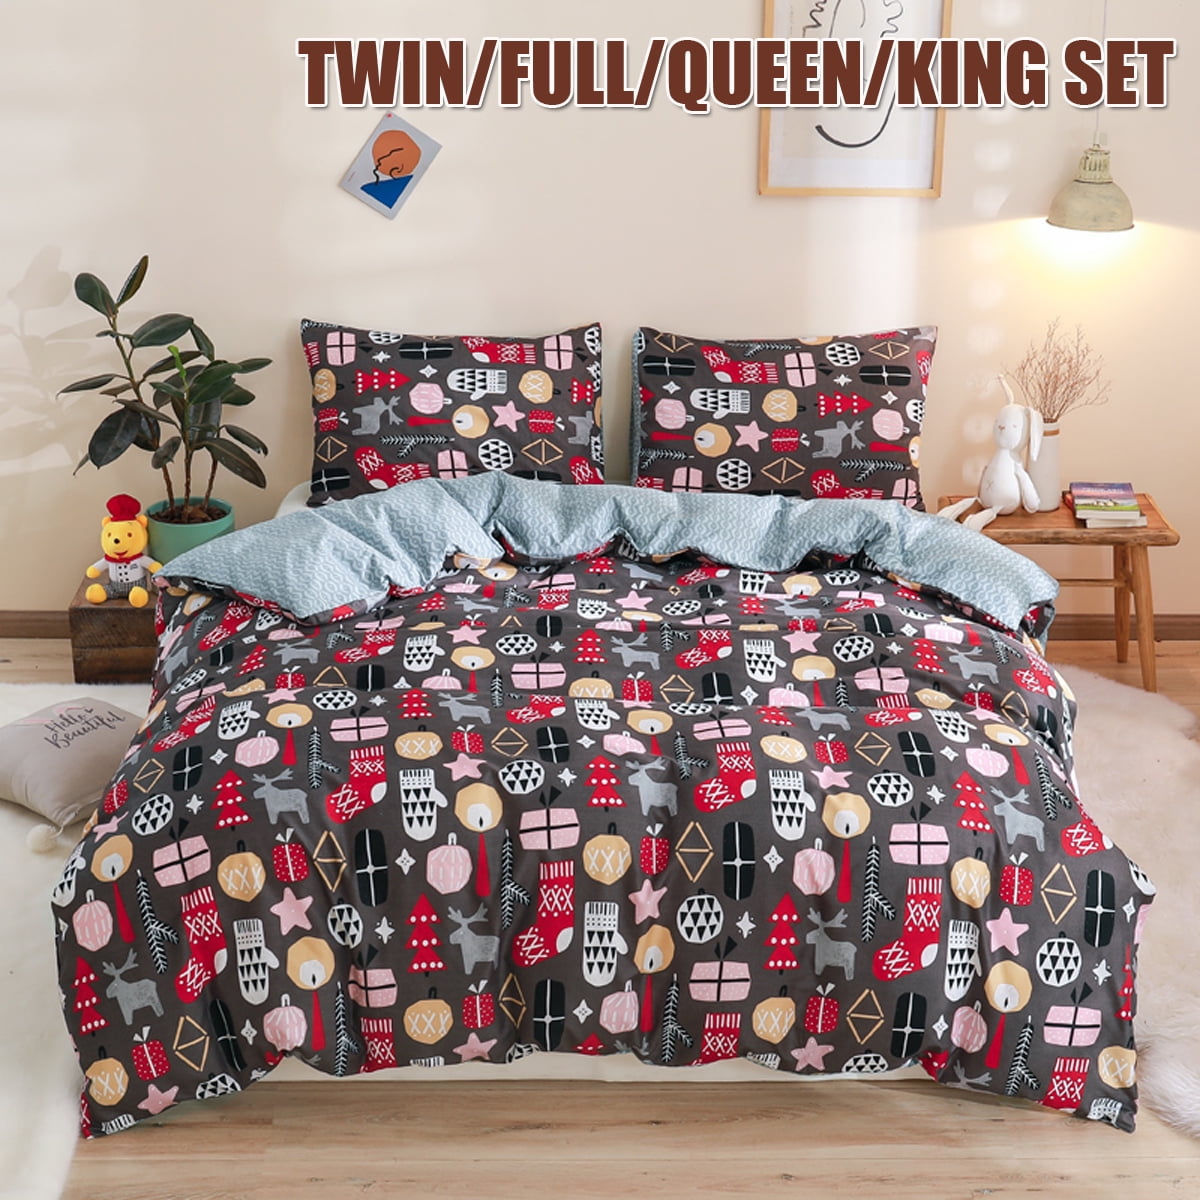 Duvet Cover Twin Full Double Queen King Toddler Charcoal Stonewashed Cotton Duvet Cover Christmas Bedding Set Duvet Cover With Buttons